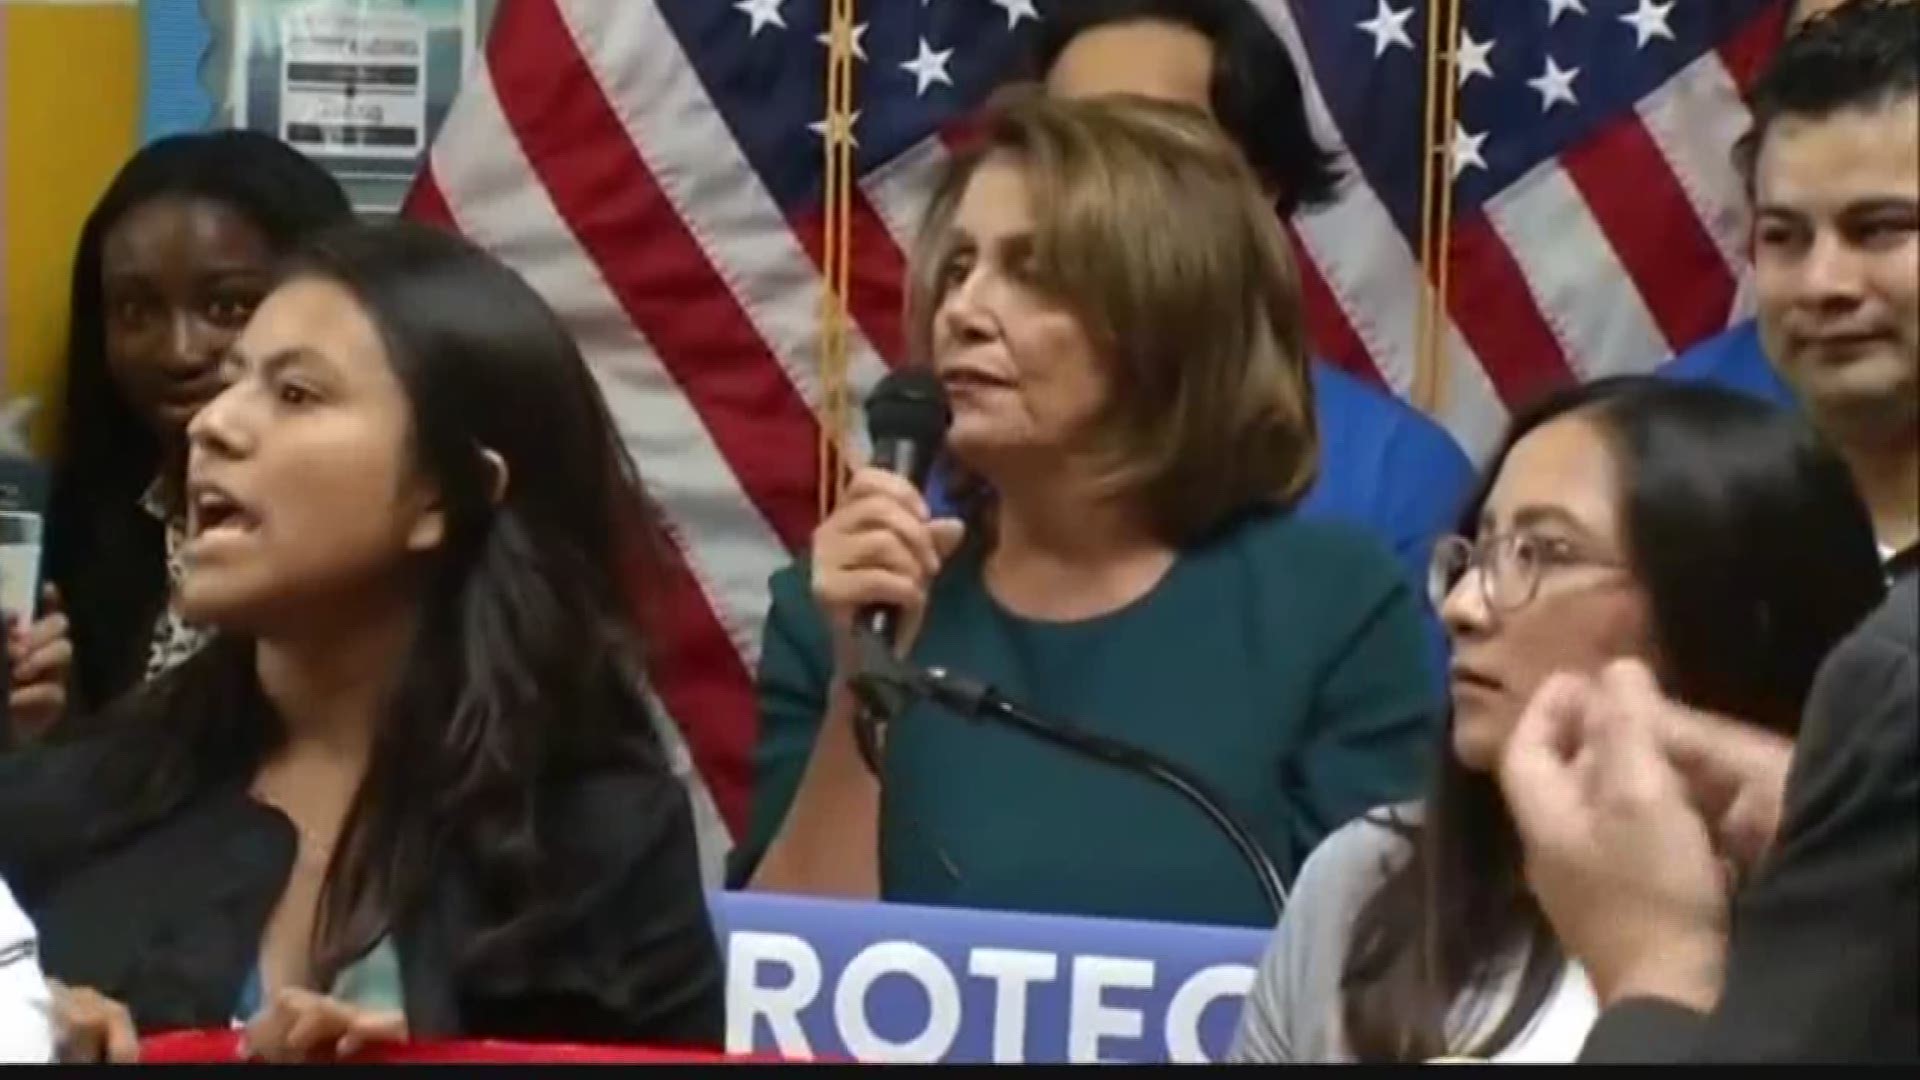 Today, House Minority Leader Nancy Pelosi planned to announce her support for the DREAM Act, which could eventually give Dreamers permanent residency. That's when DACA protesters arrived.